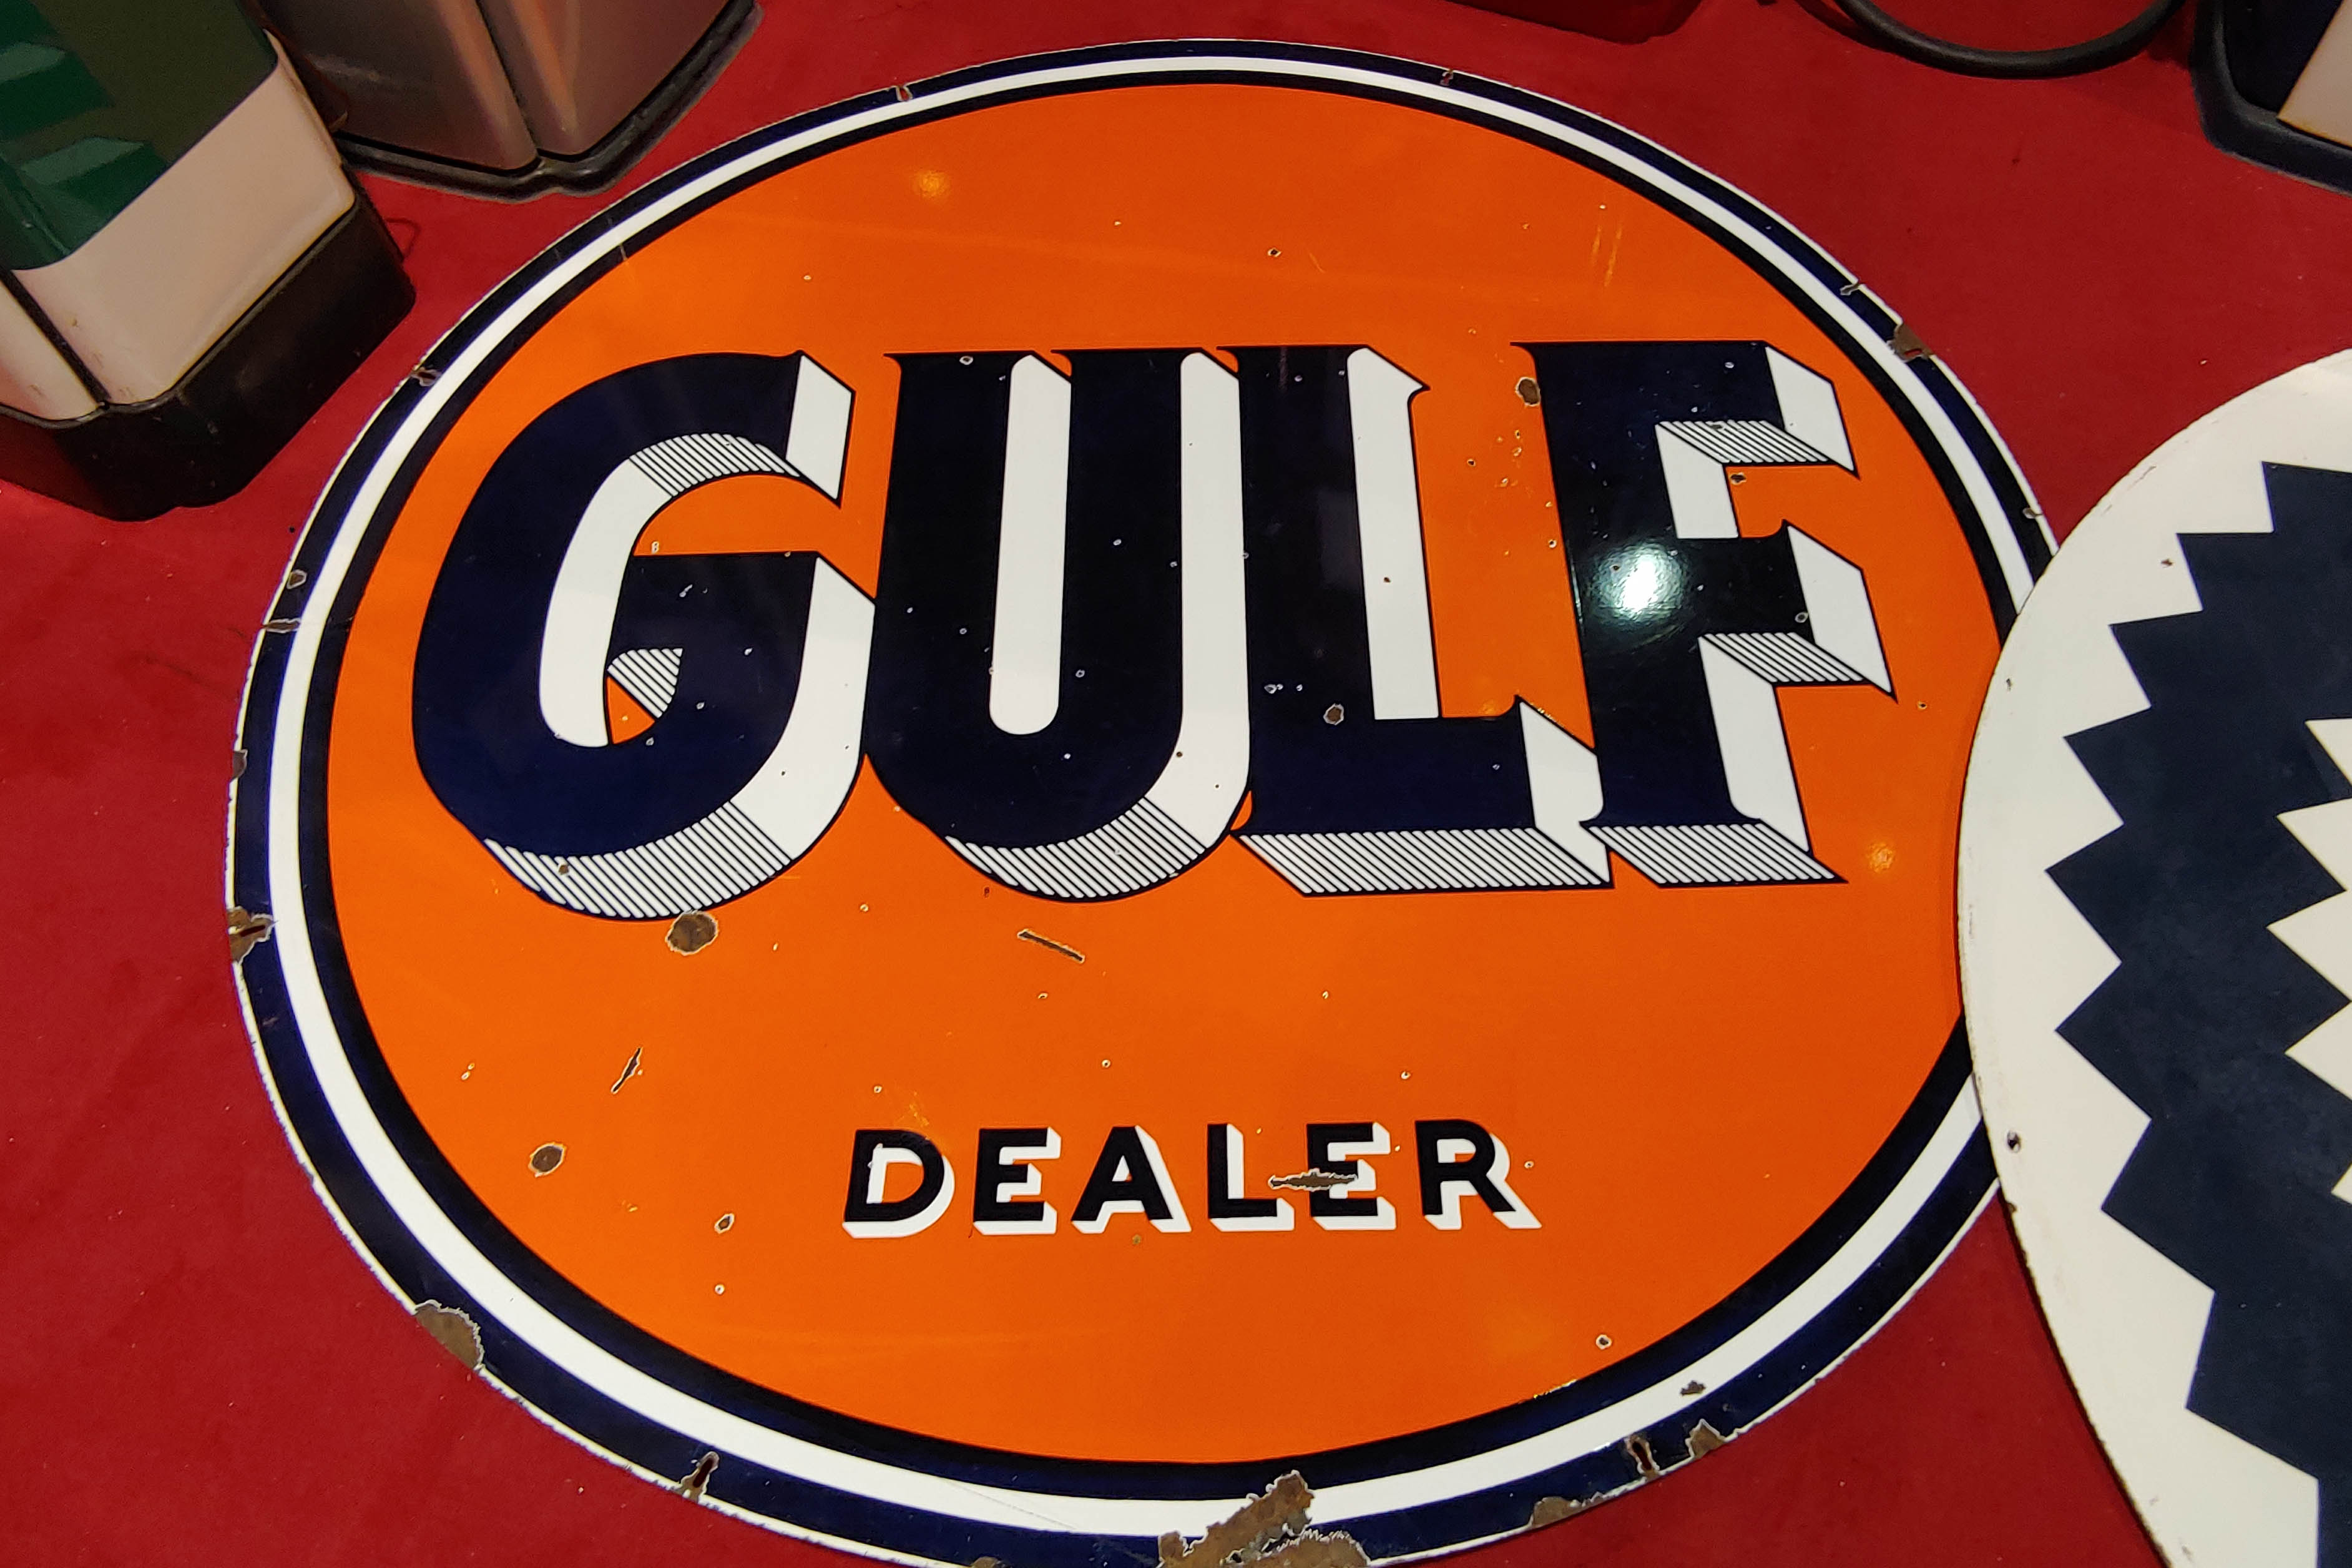 0th Image of a N/A GULF DEALER METAL SIGN LG ROUND